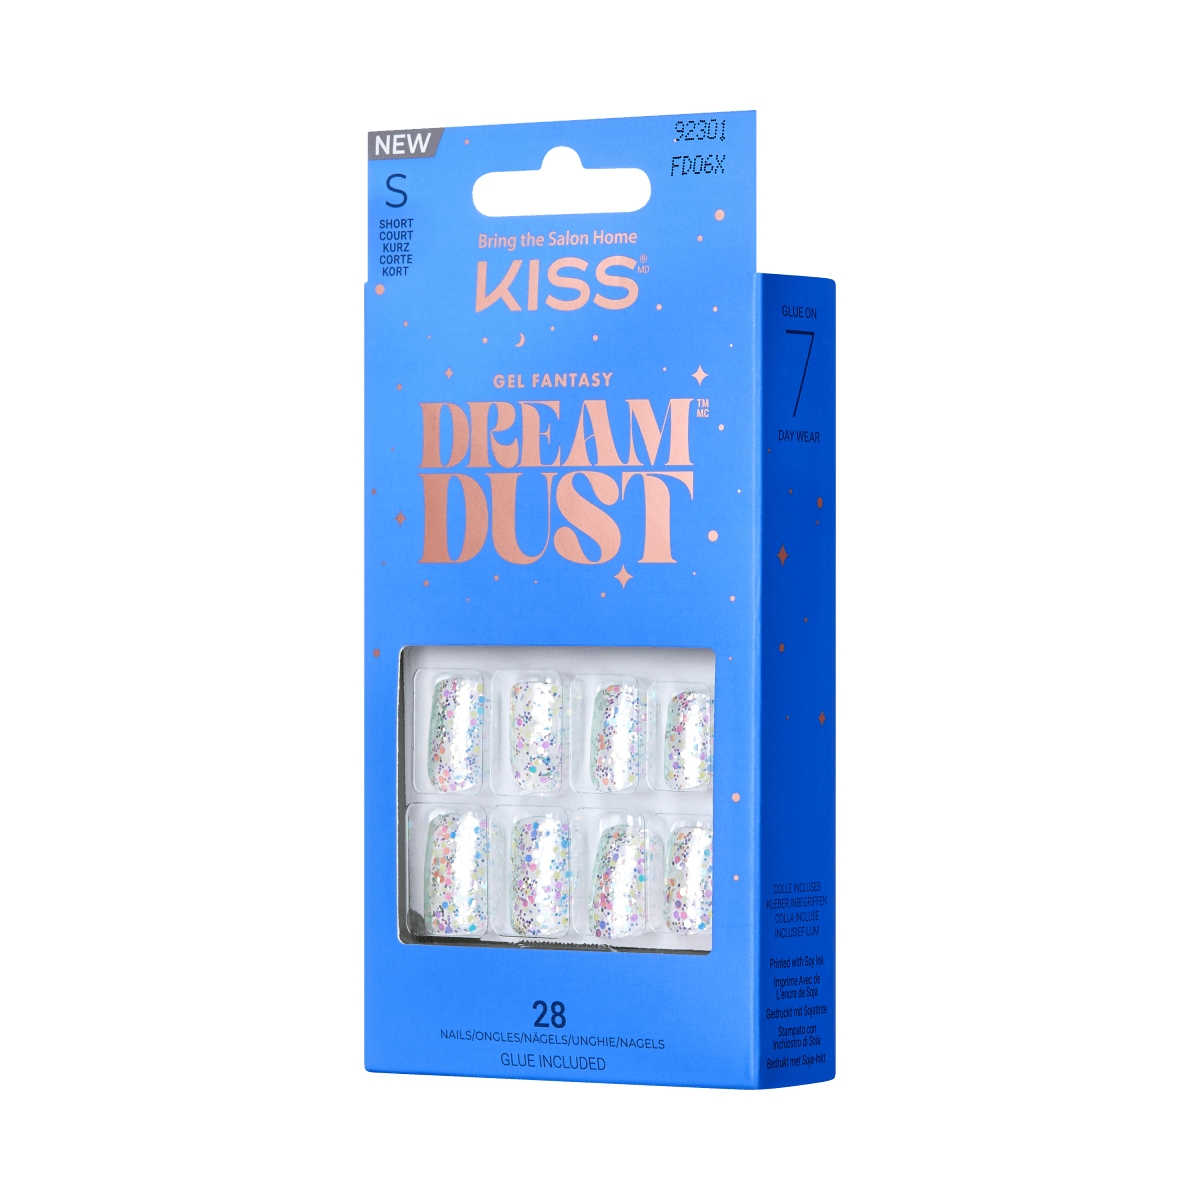 KISS Gel Fantasy Dreamdust, Press-On Nails, Mesmerized, Clear, Short Squoval, 28ct